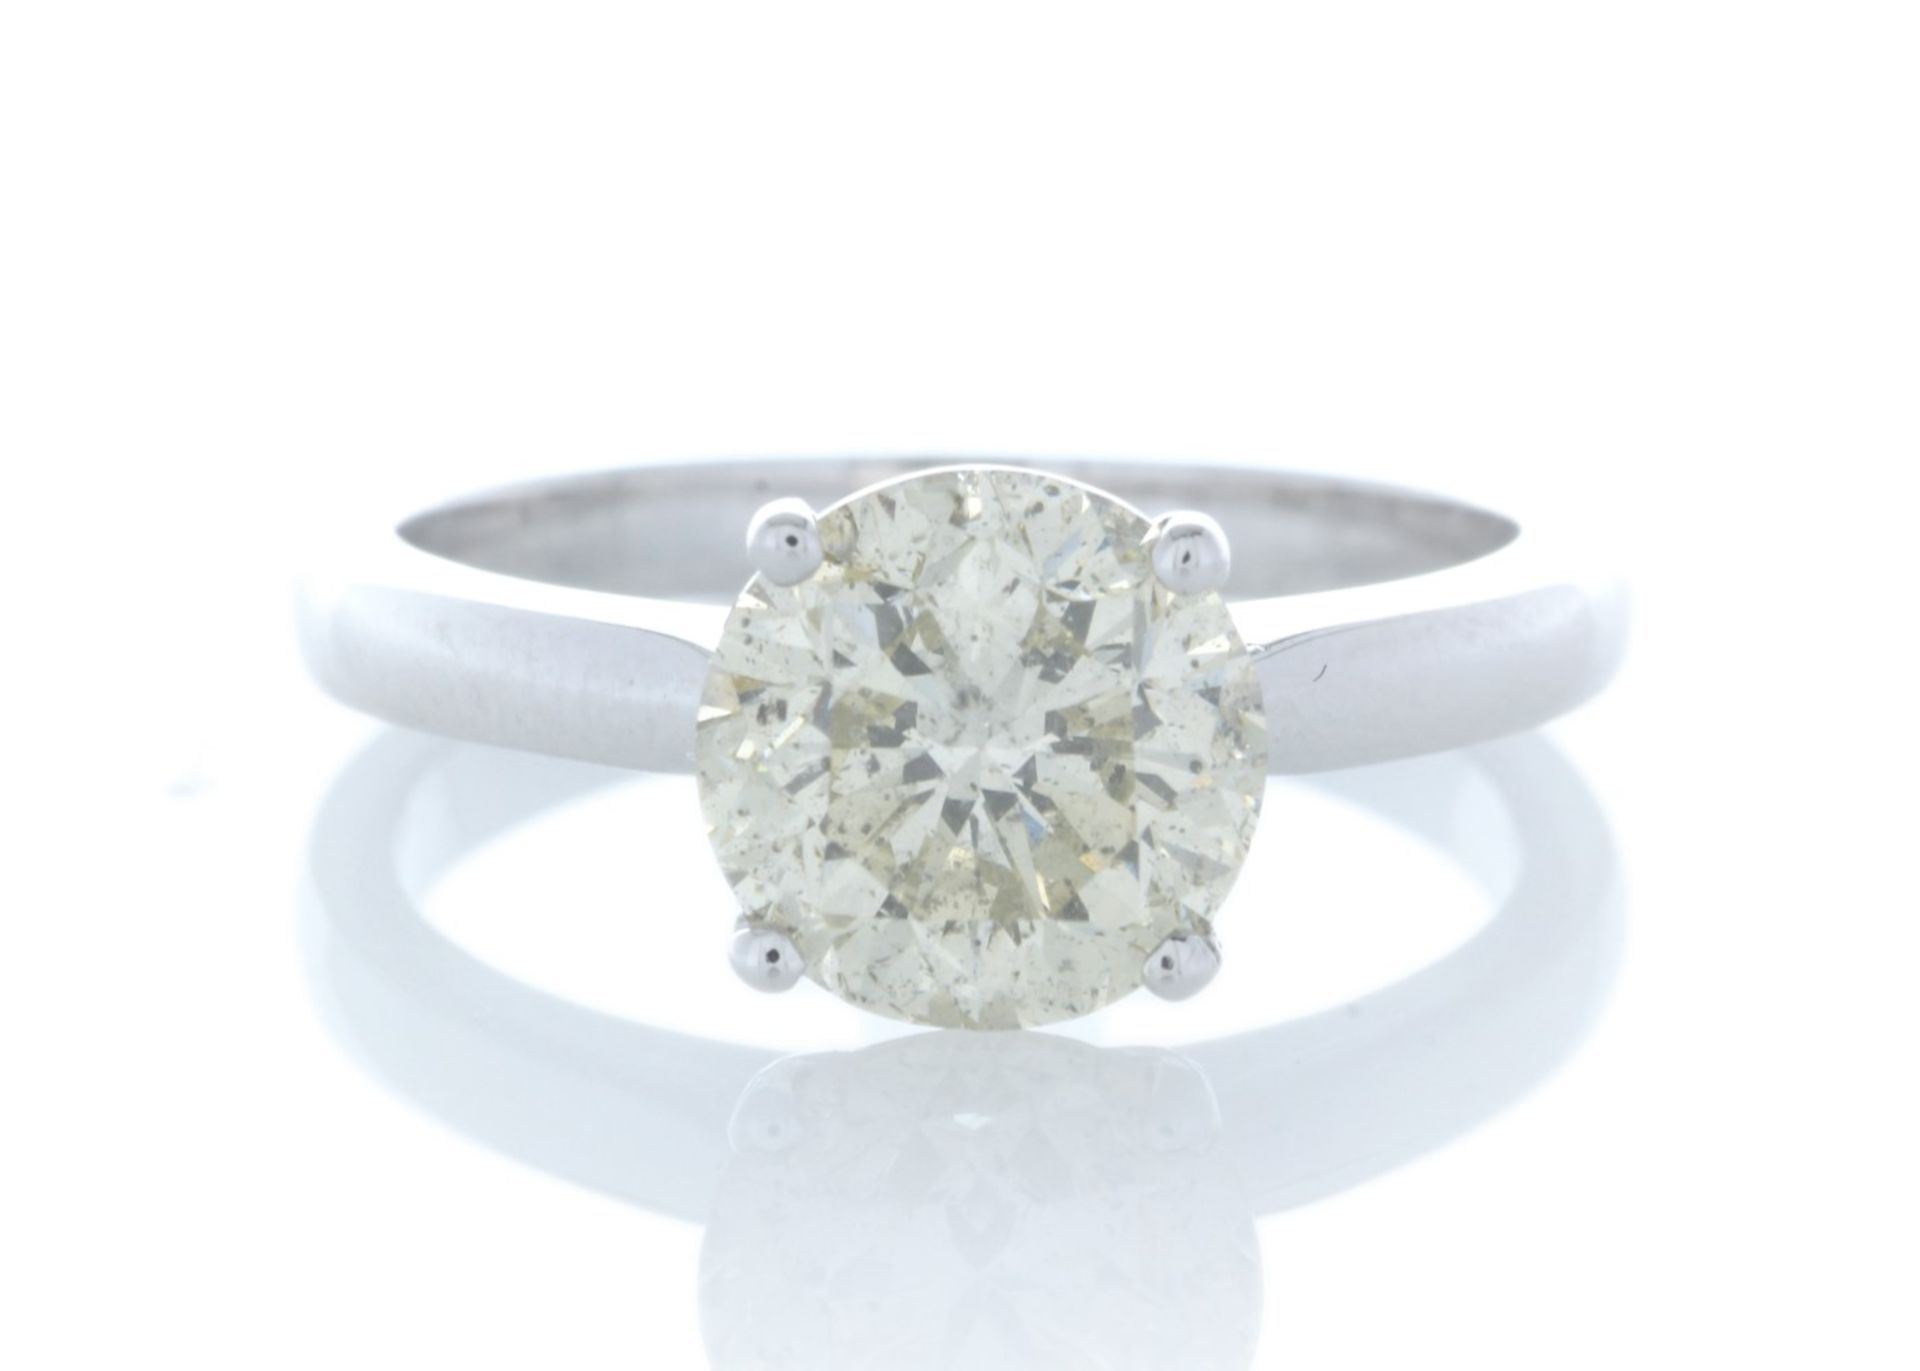 18ct White Gold Single Stone Rex Set Diamond Ring 2.29 Carats - Valued by GIE £49,150.00 - A massive